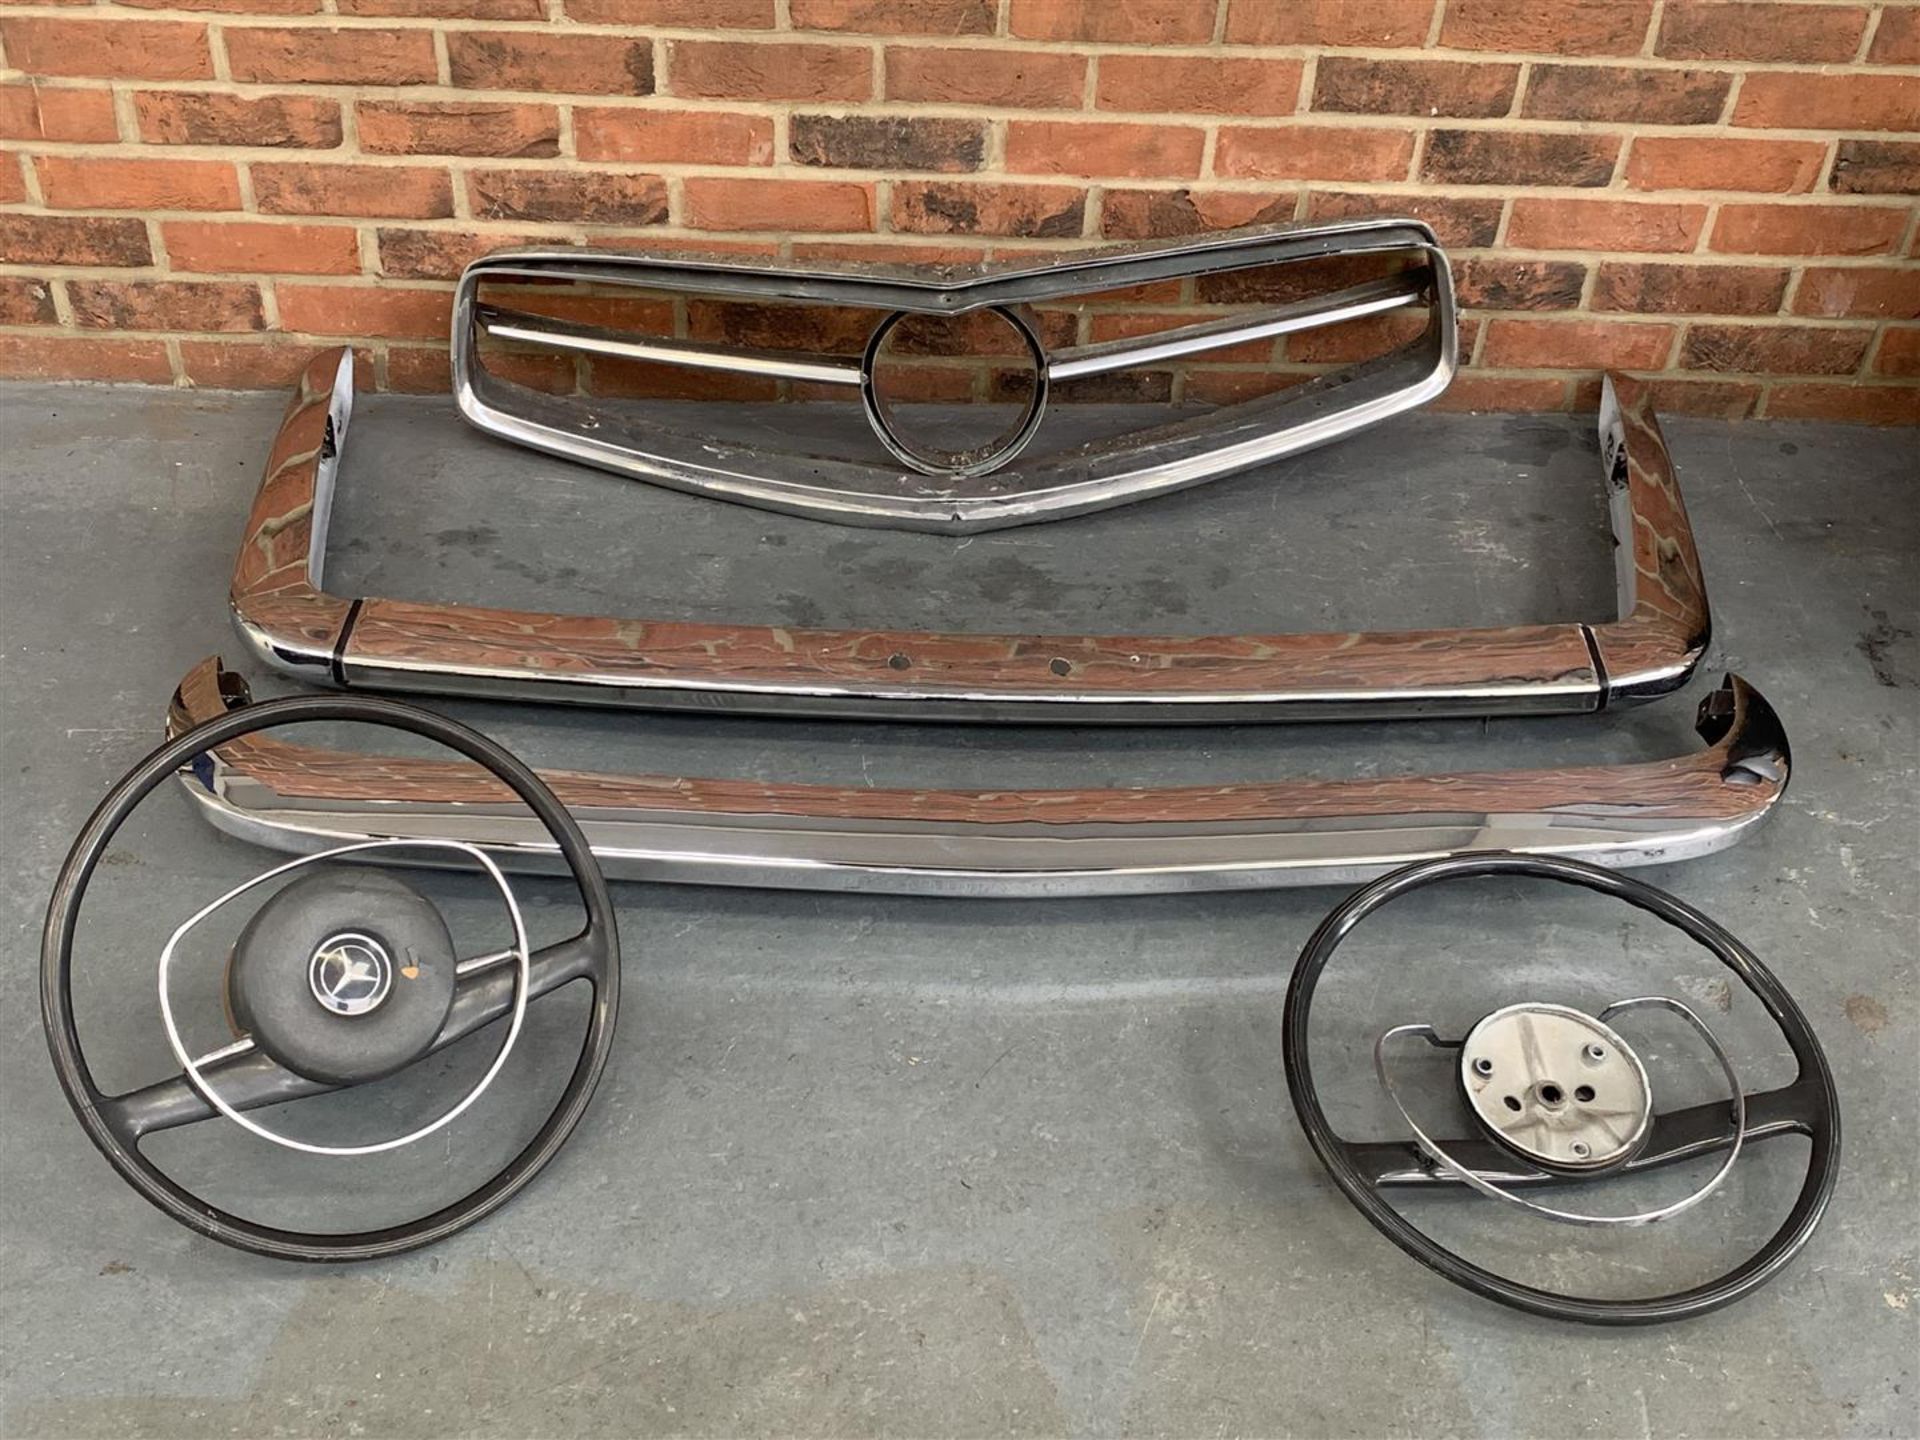 Mercedes SL Grille, Two Steering Wheels & Two Triumph Bumpers